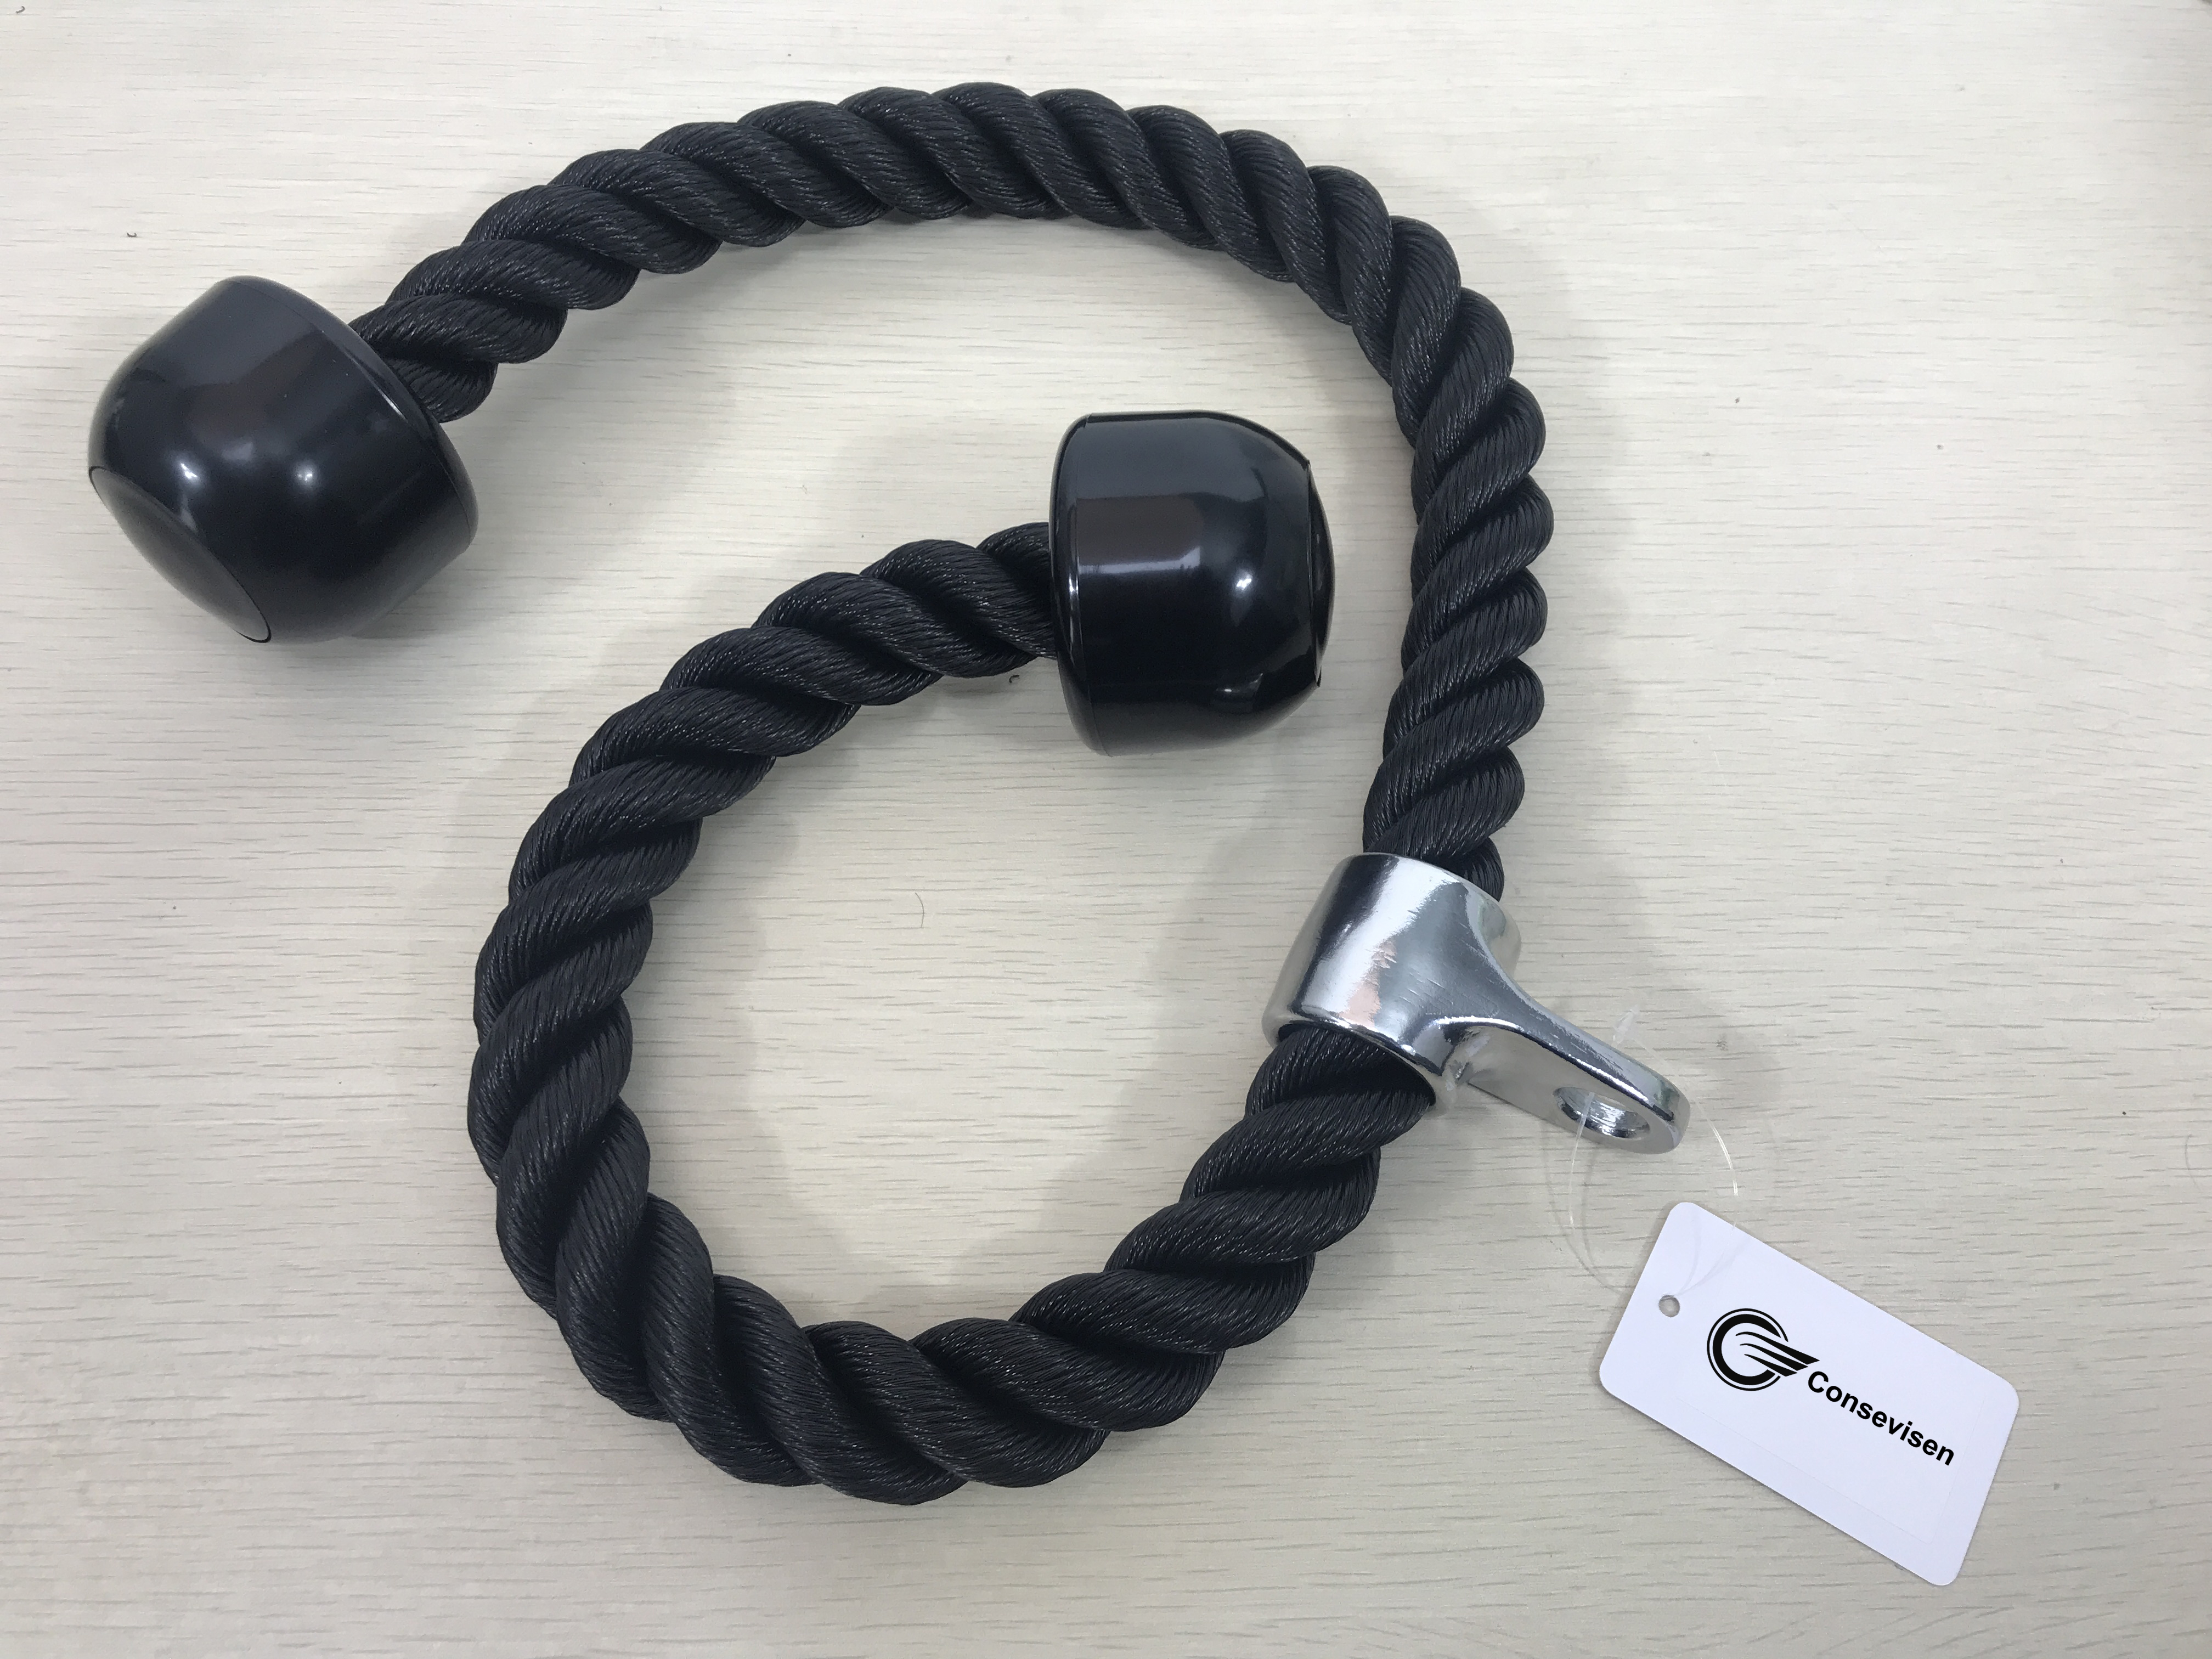 Consevisen Premium Cable Machine Pull Down Rope Attachment for a Full-Body Workout